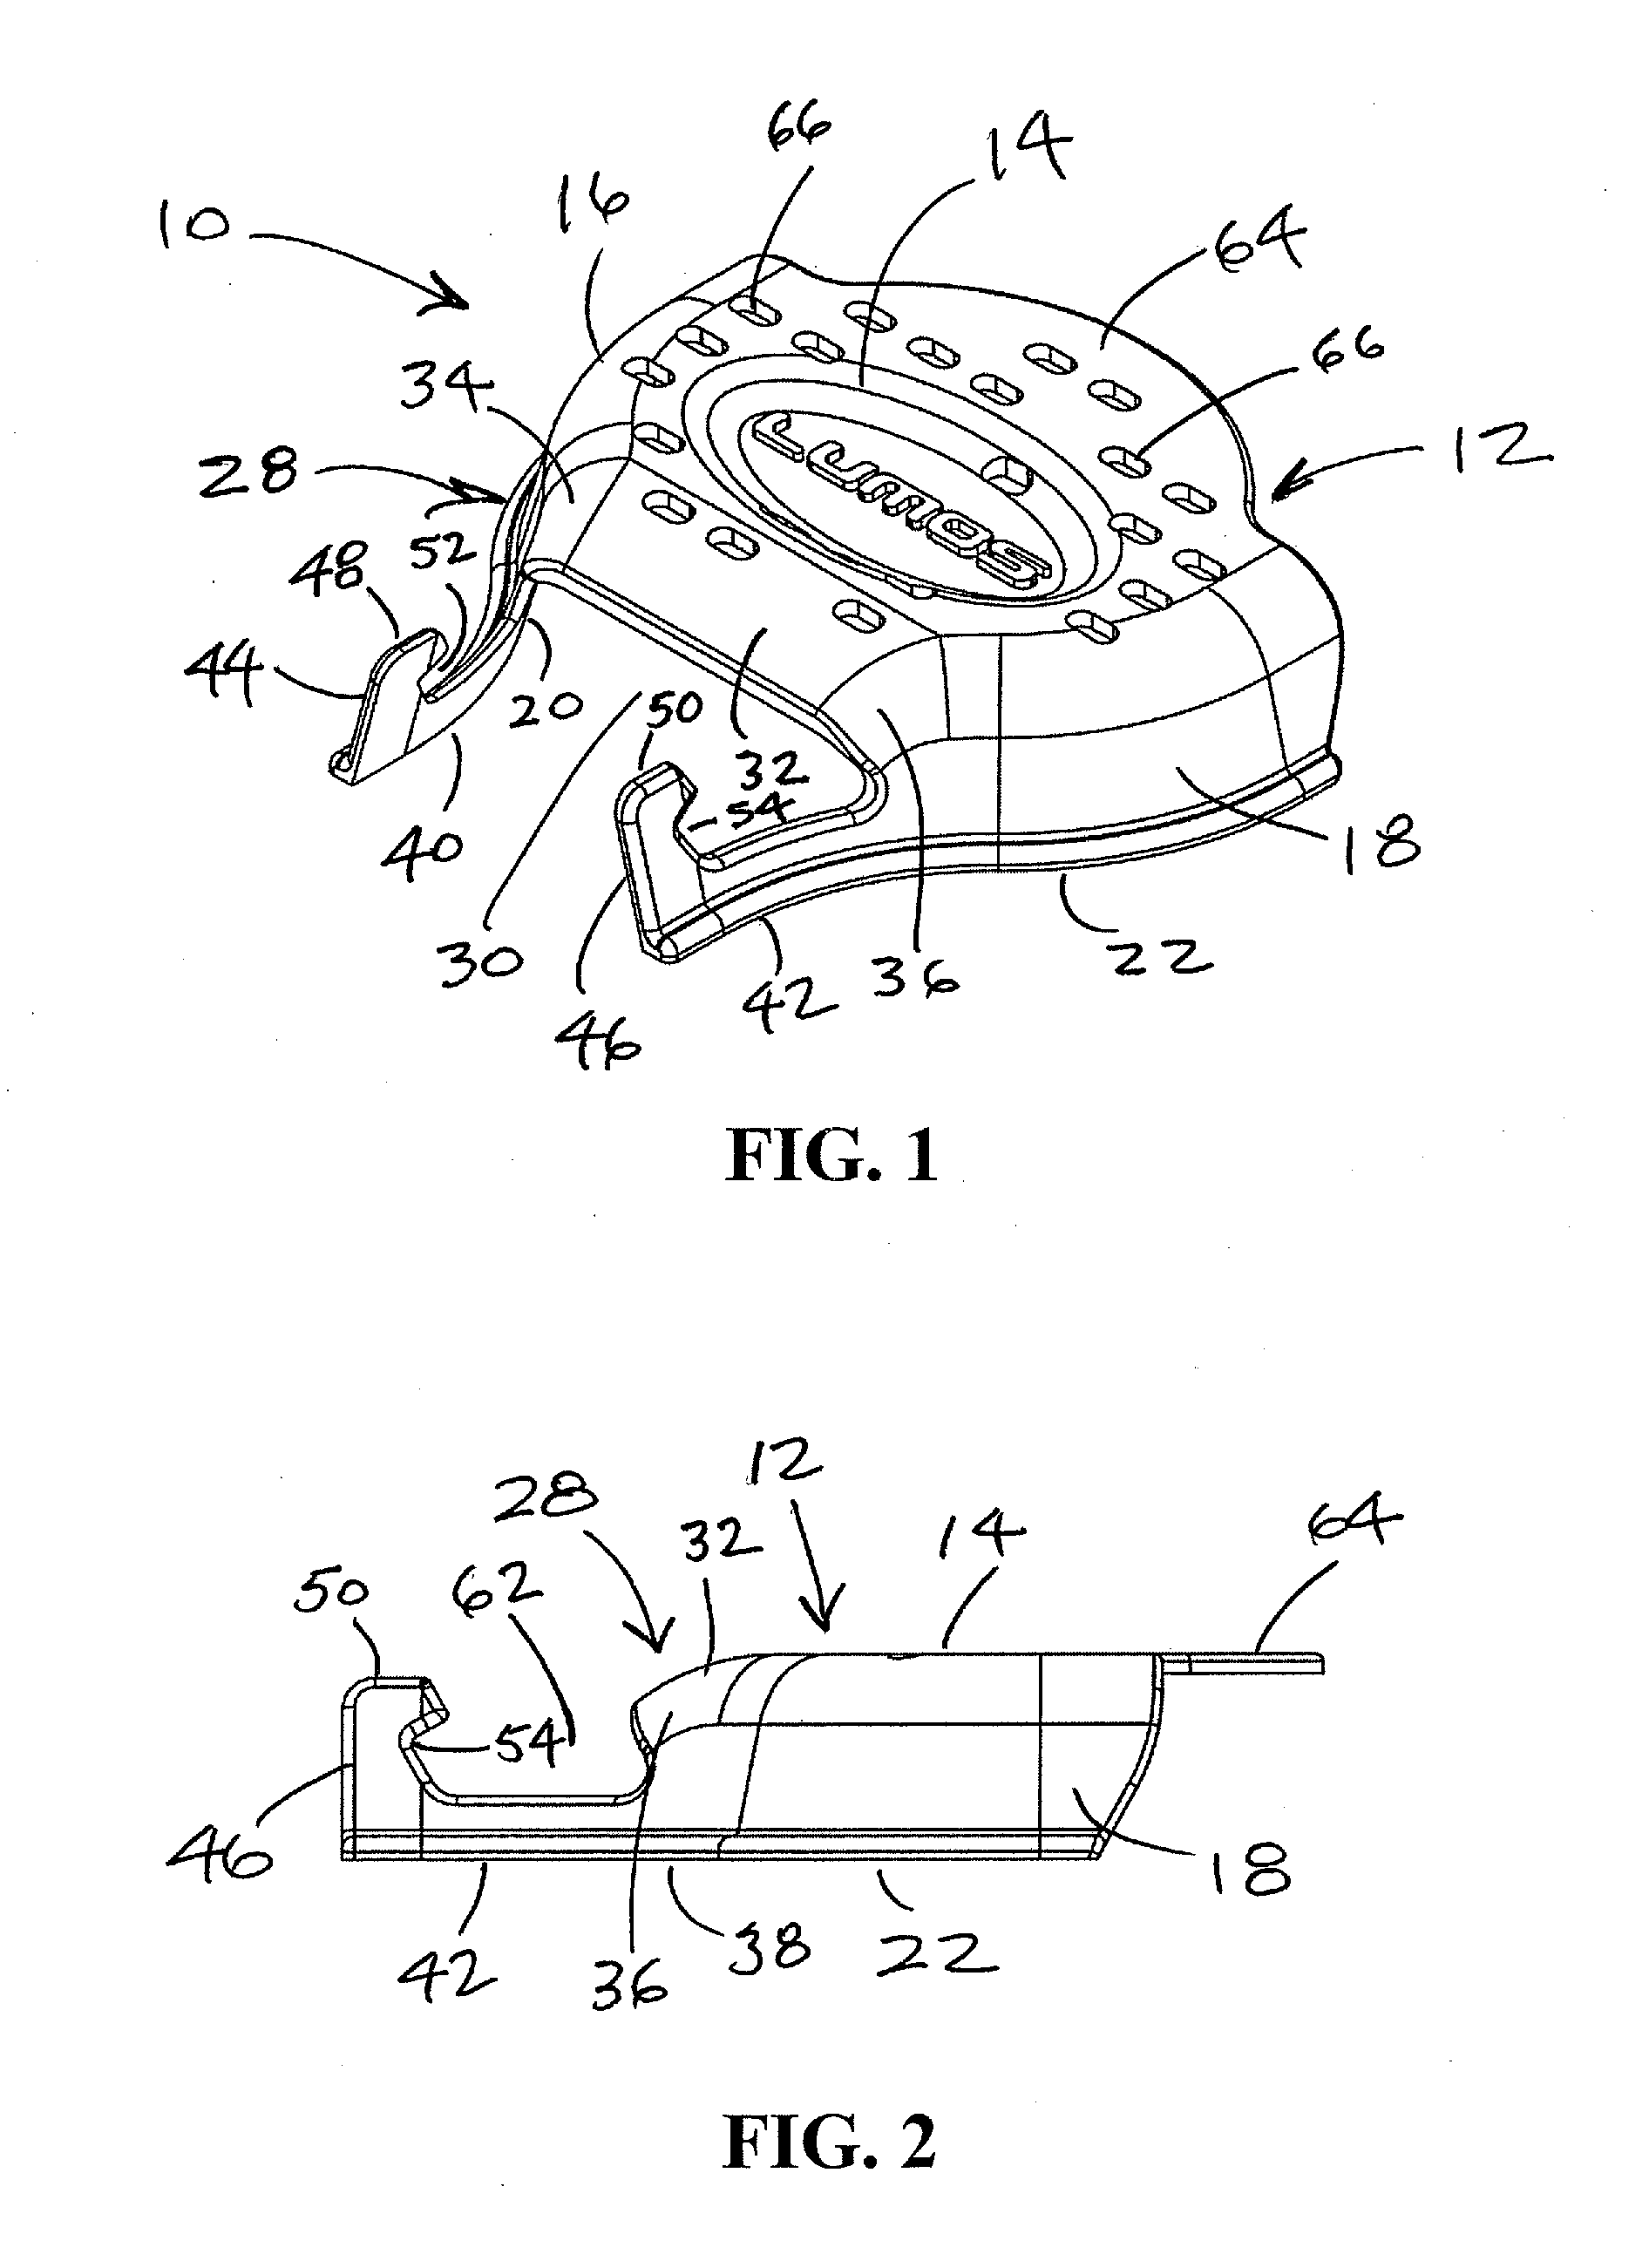 Junction Cover for Photovoltaic Panel Modules